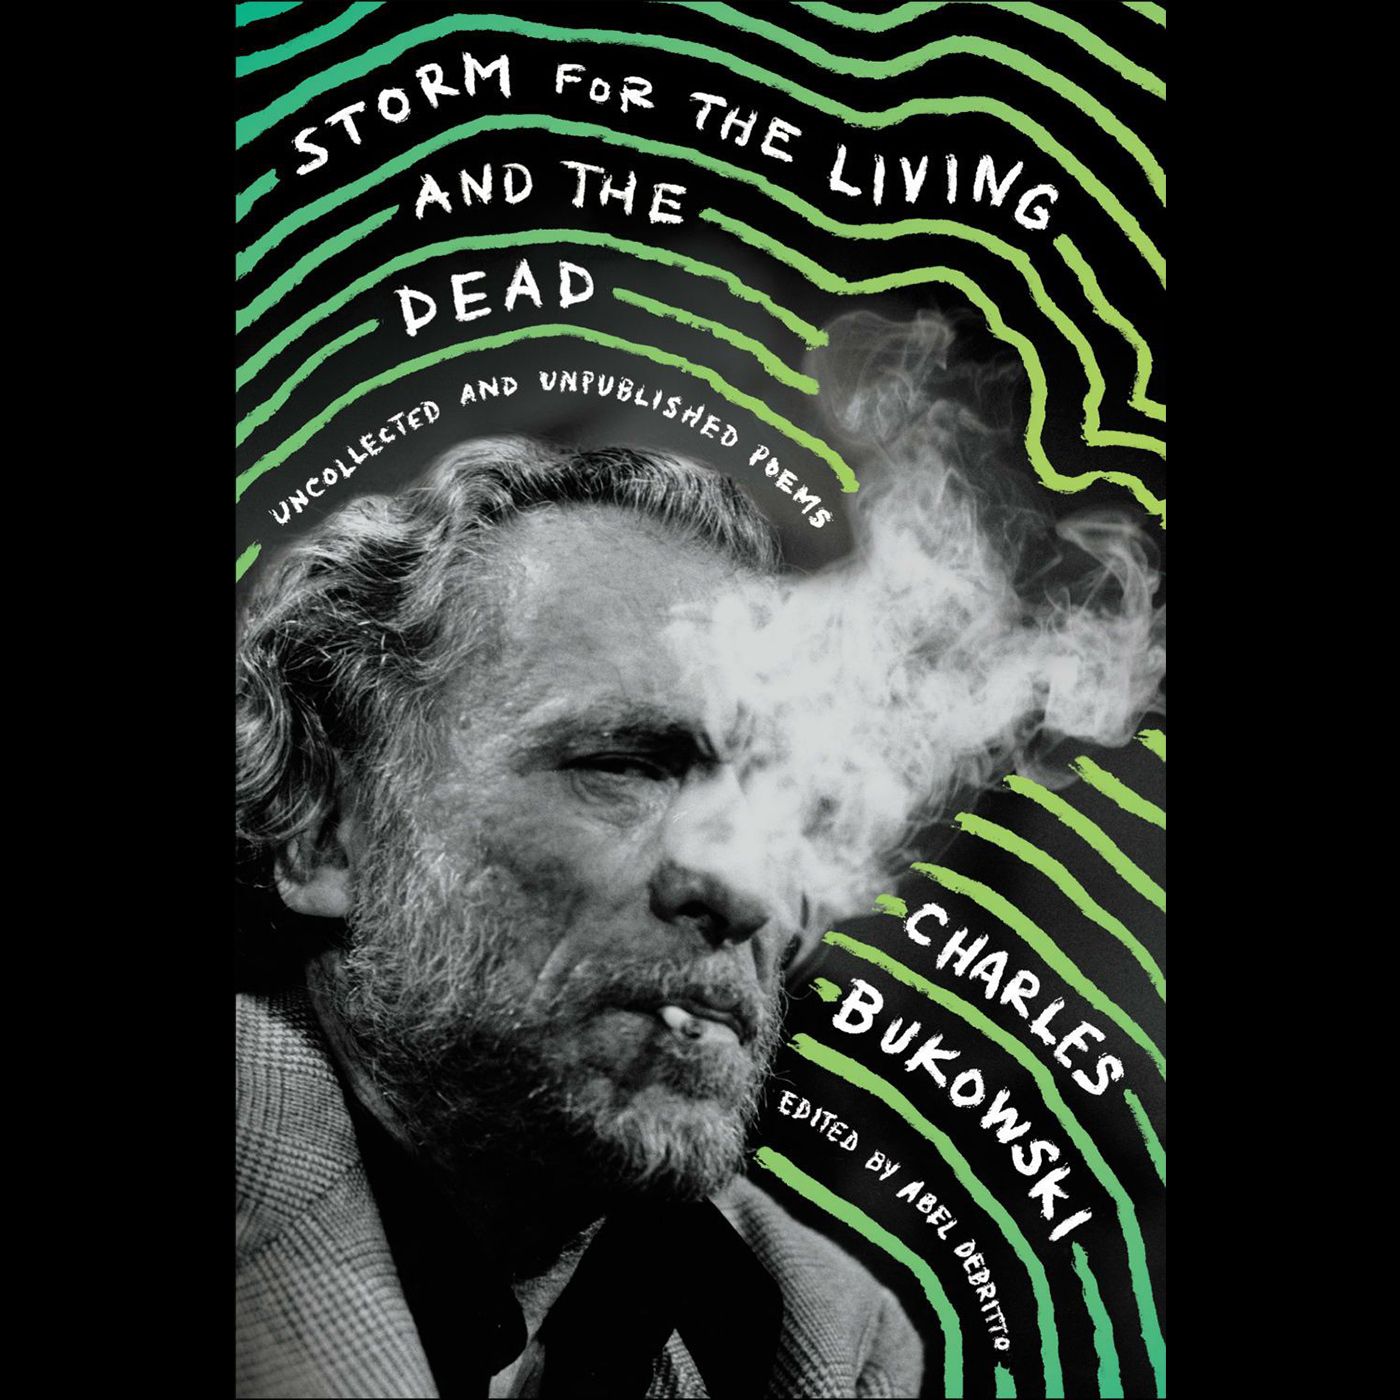 Storm for the Living and the Dead by Charles Bukowski